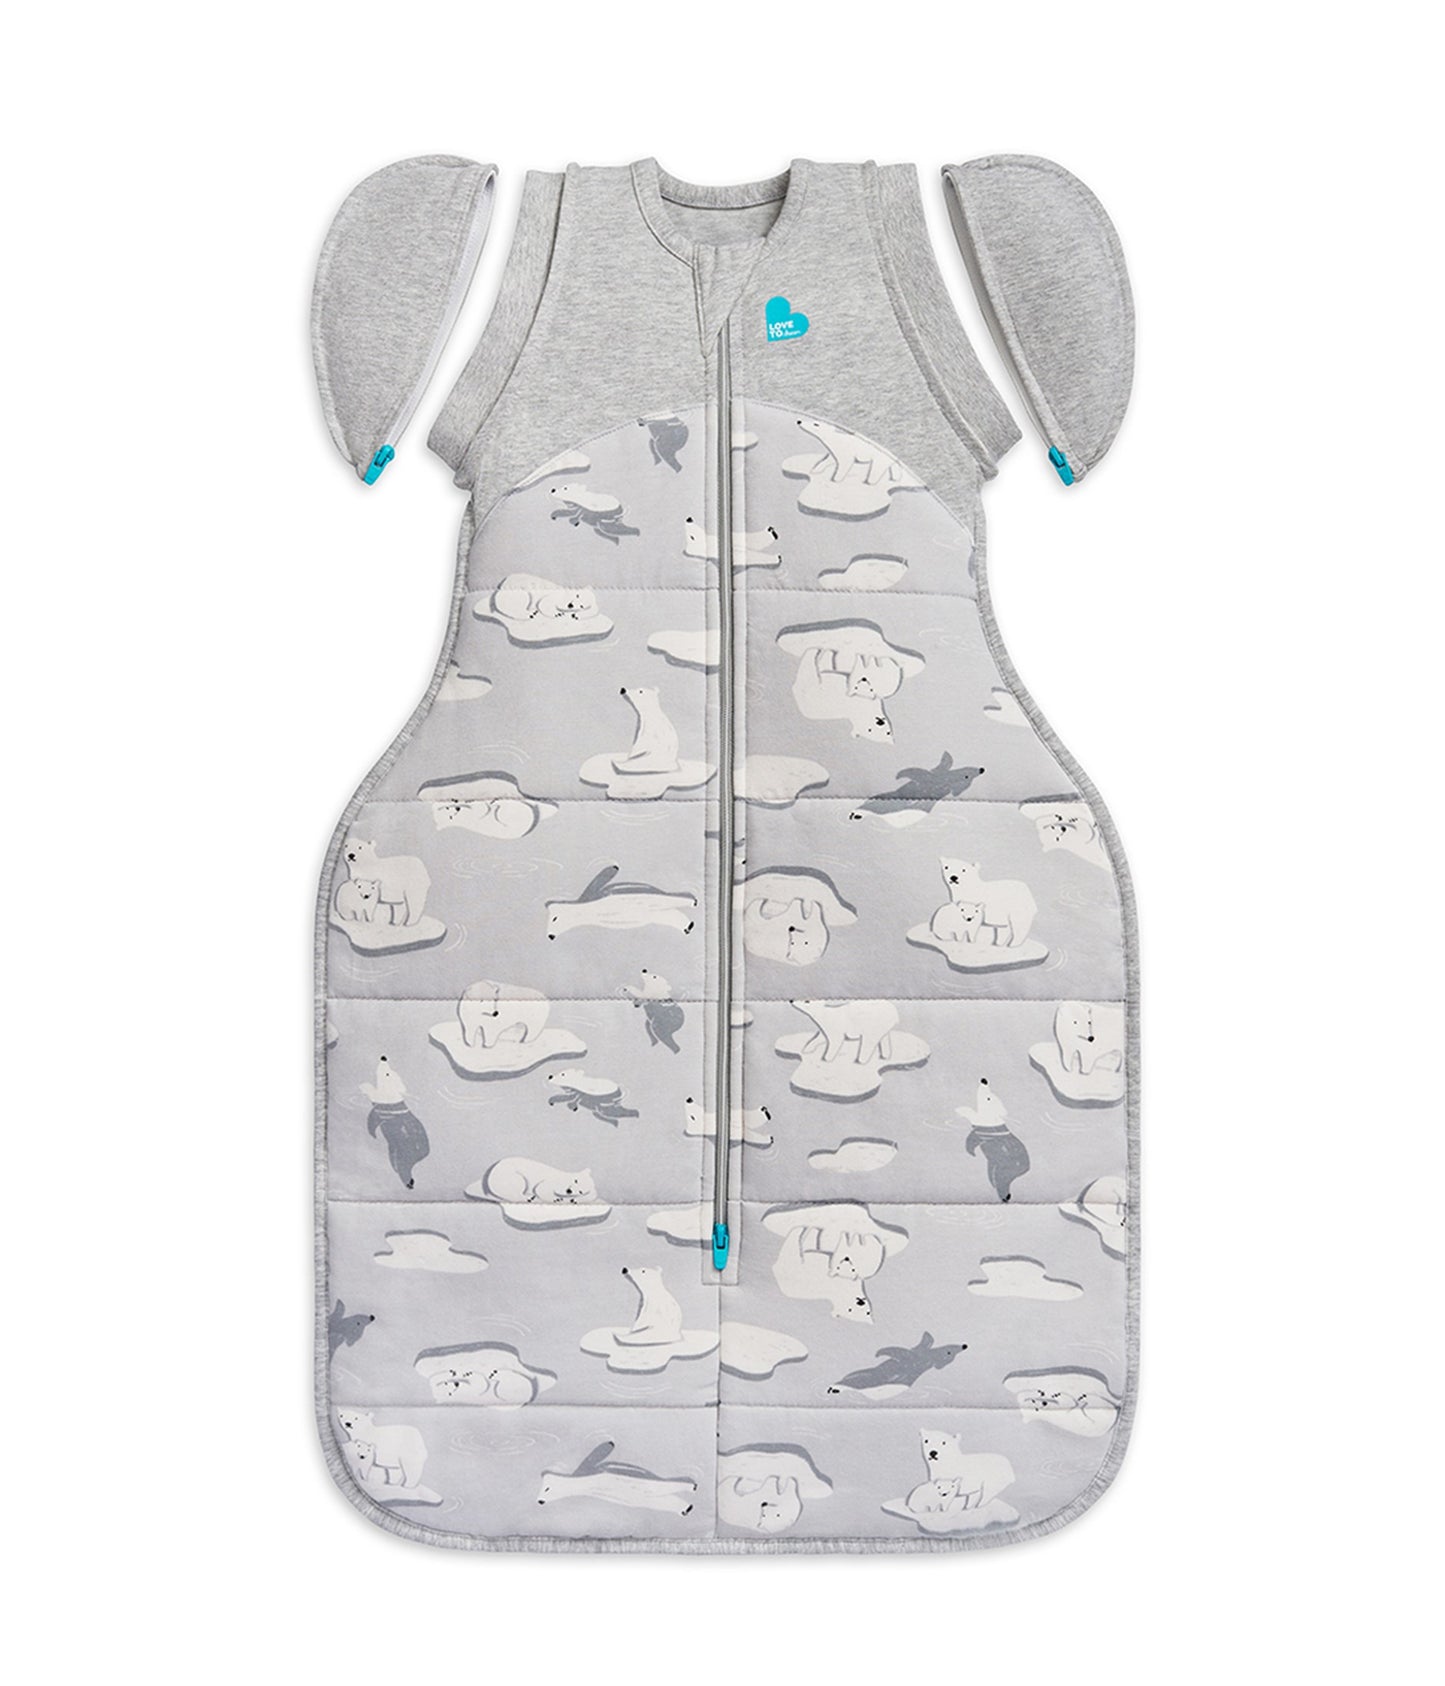 Love To Dream Swaddle Up Transition Bag Extra Warm 3.5 Tog - Grey Sth Pole